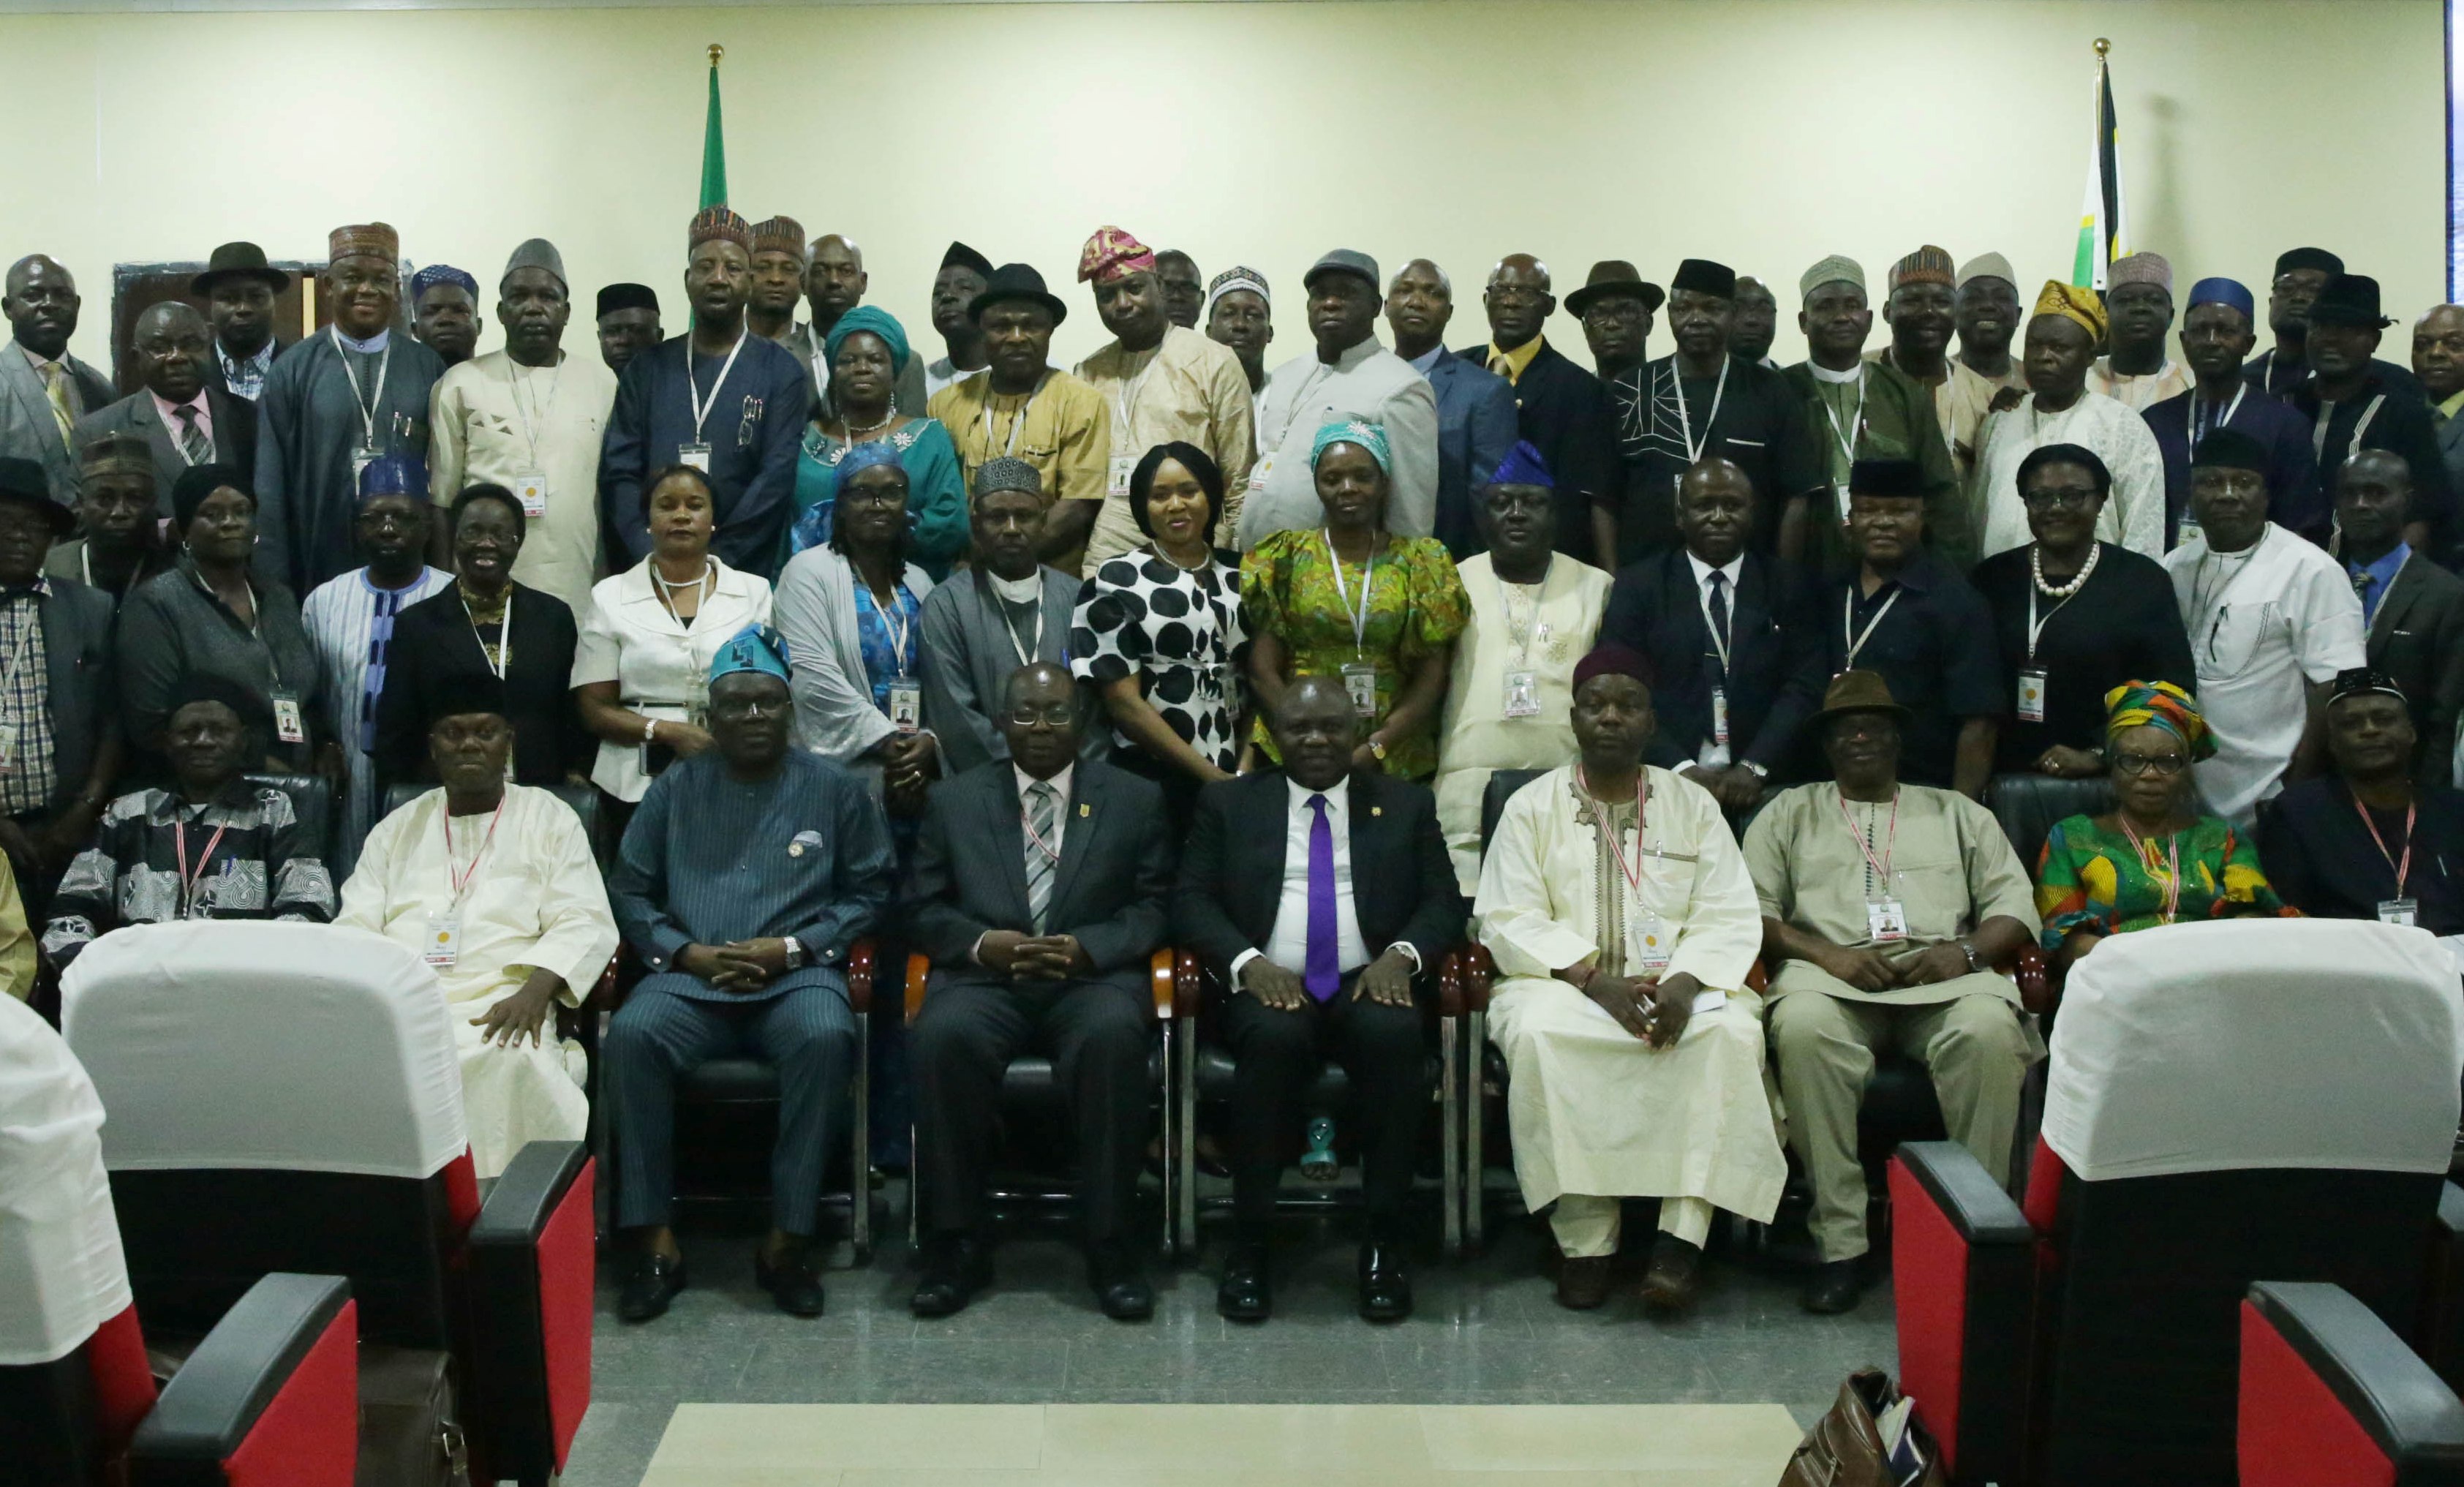 Lagos State Governor, Mr. Akinwunmi Ambode (seated middle), with participants of the 2018 Executive Management Course of the Institute for Security Studies in Abuja, on Tuesday, July 24, 2018.